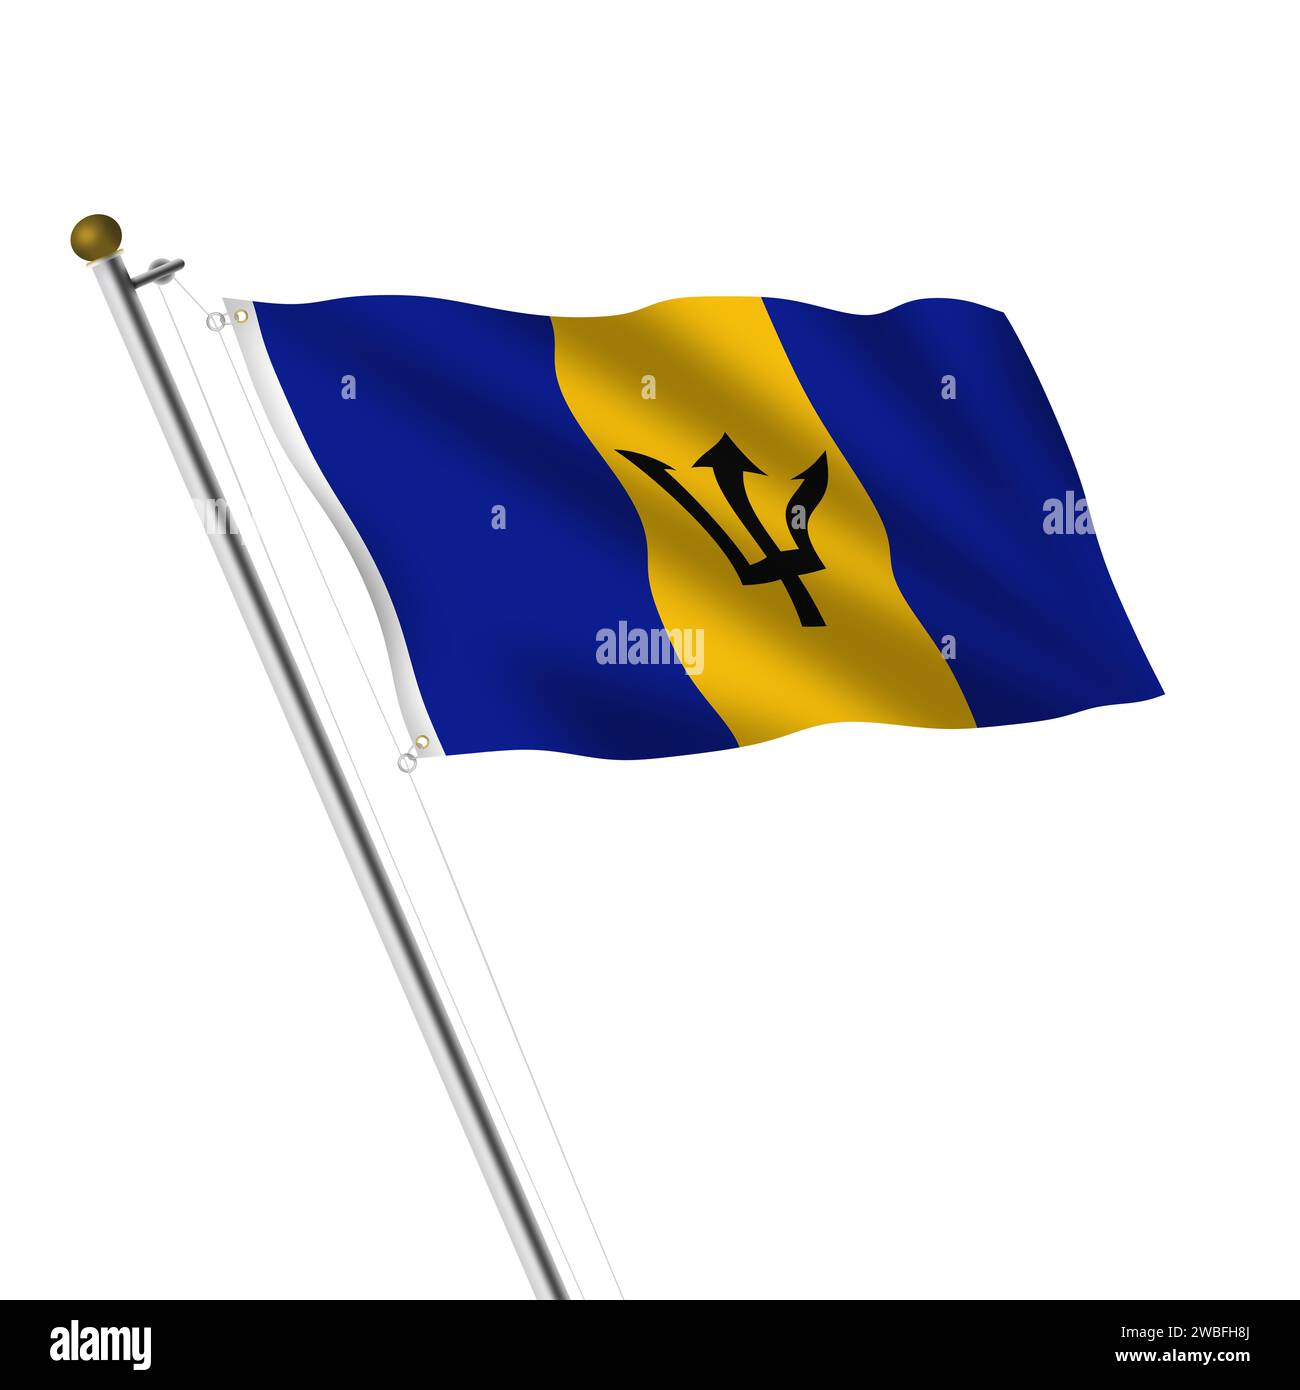 Barbados Flagpole 3d illustration on white with clipping path Stock Photo